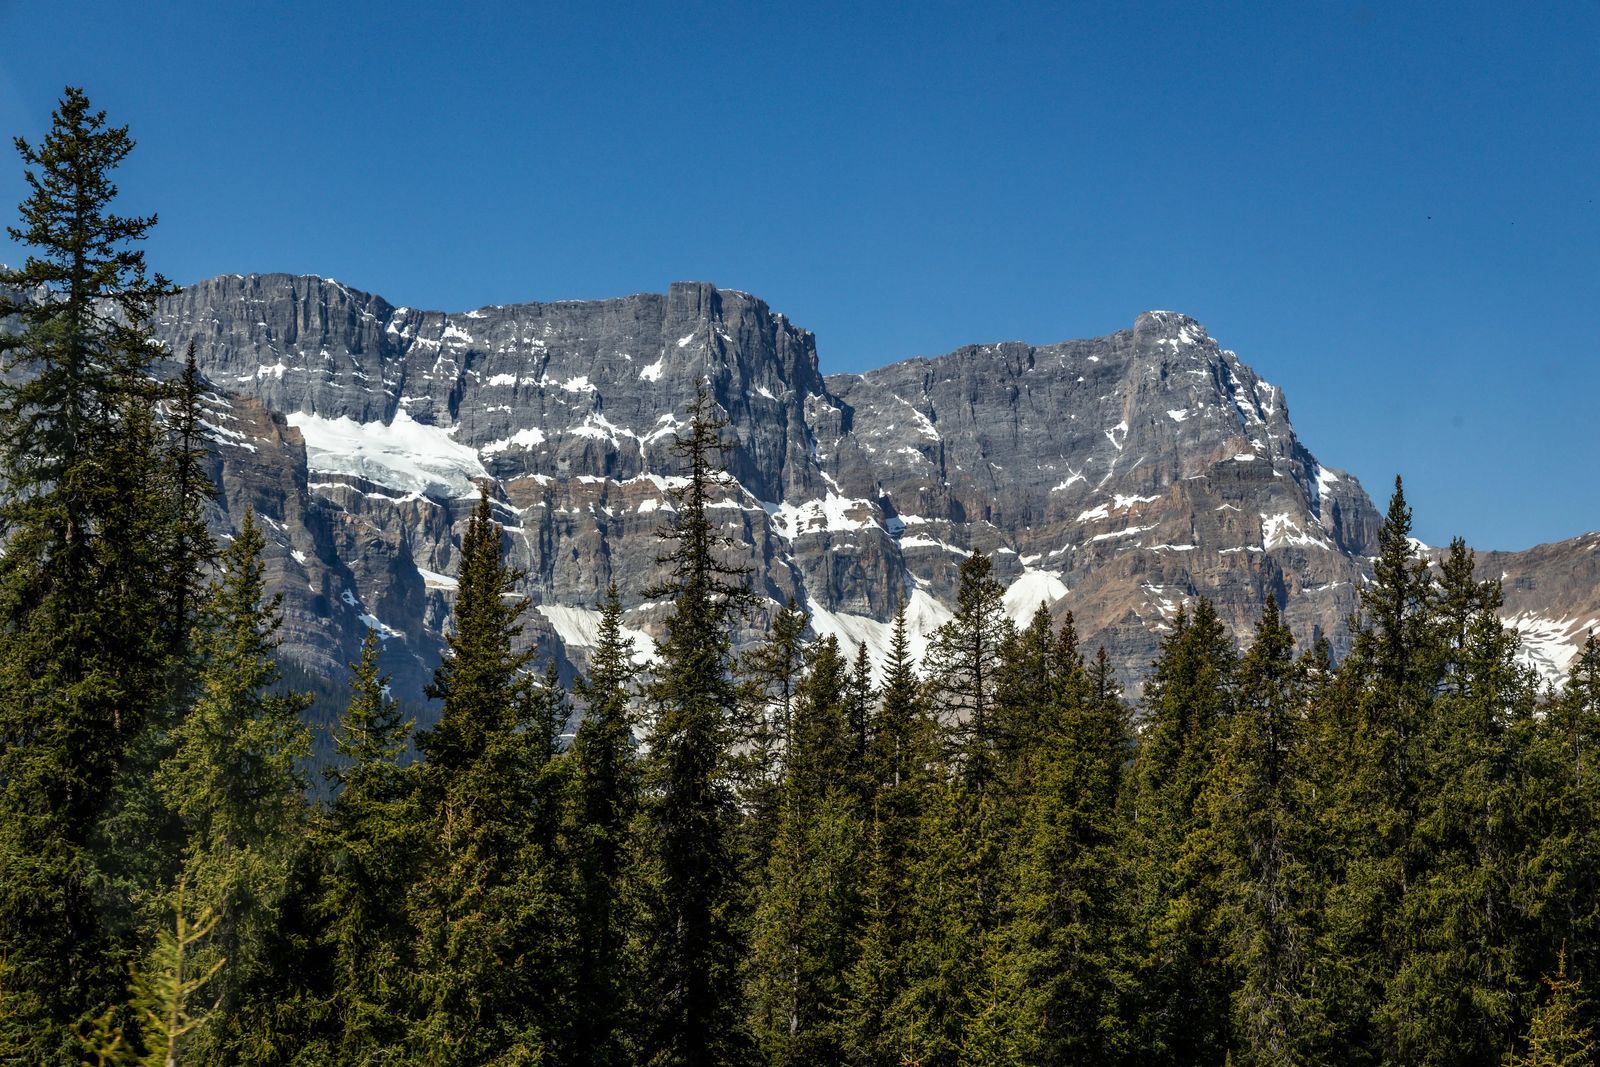 snow lined grey mountains with pine trees in foreground  - The BEST of the Icefields Parkway Banff